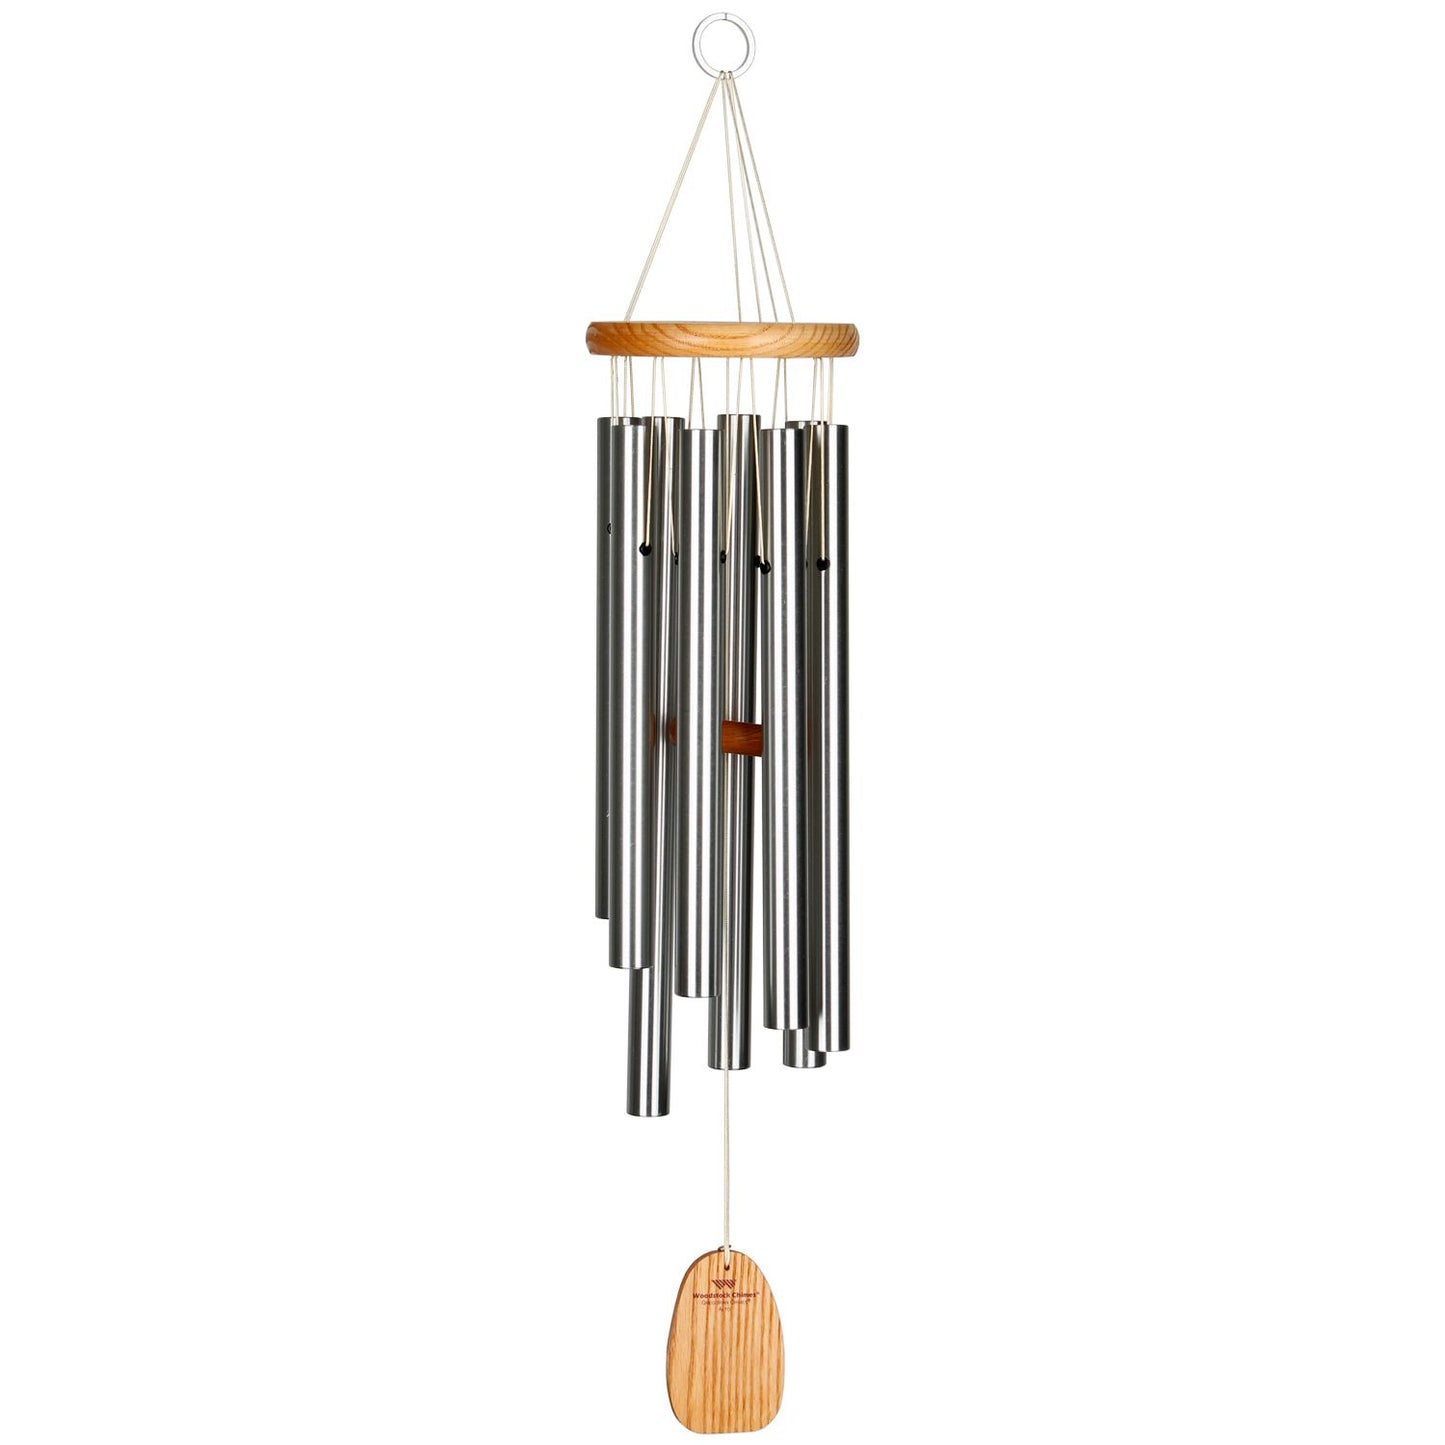 27" Silver Gregorian Alto Wind Chime by Woodstock | Outdoor Chimes | Patio Decor | Housewarming Gifts | Gifts for Mom | Gifts for Her